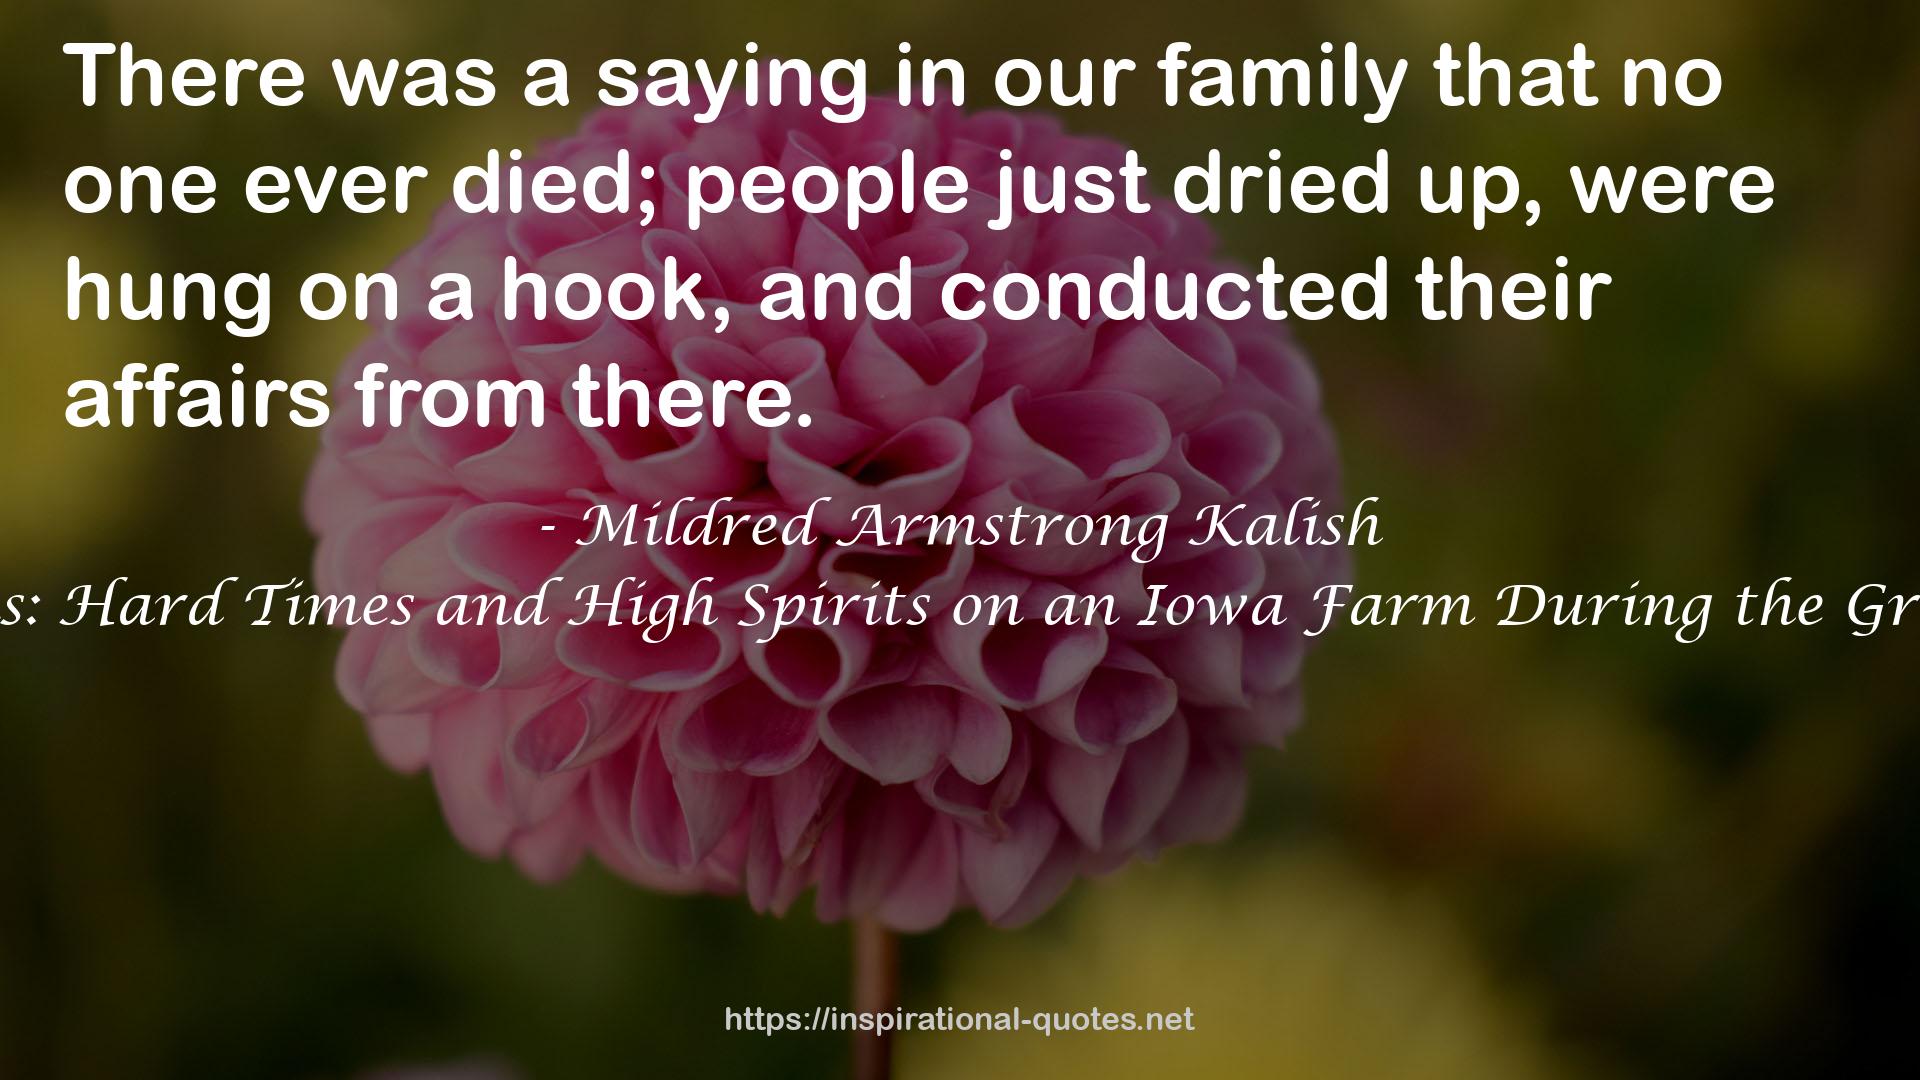 Mildred Armstrong Kalish QUOTES